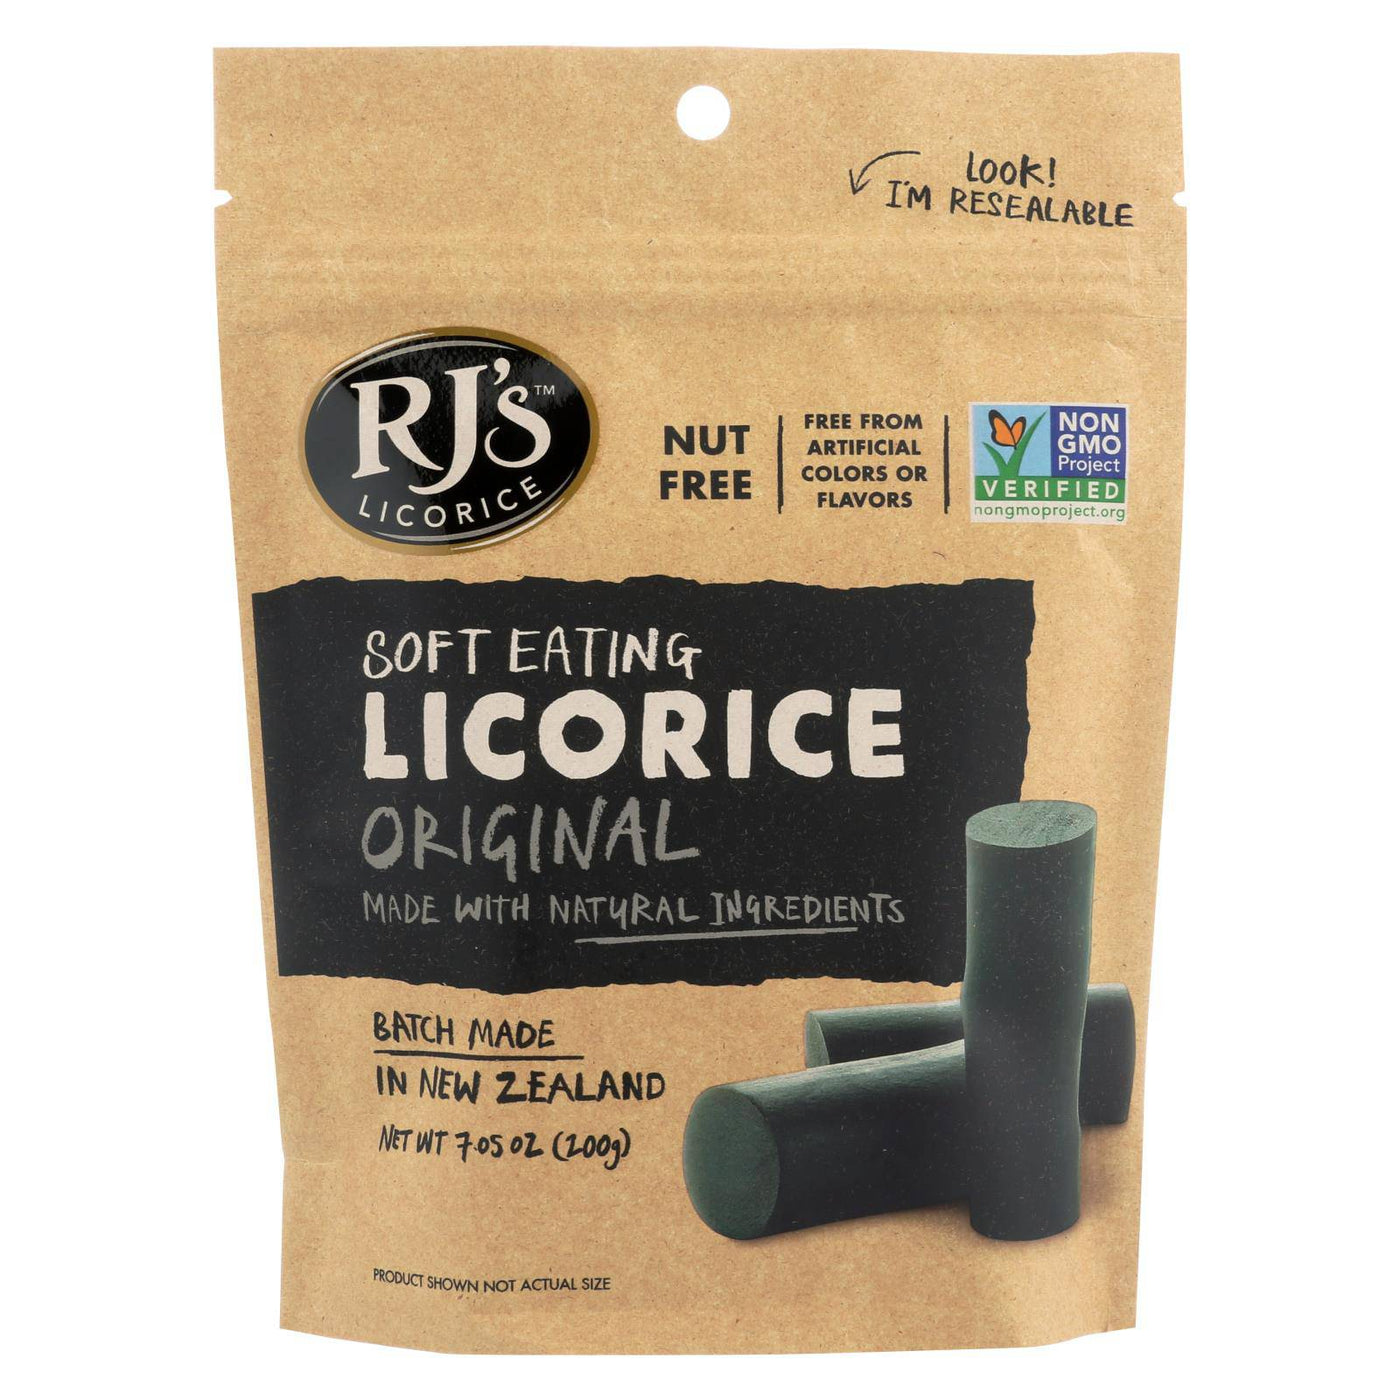 Rj's Licorice Soft Eating Licorice - Original - Case Of 8 - 7.05 Oz | OnlyNaturals.us